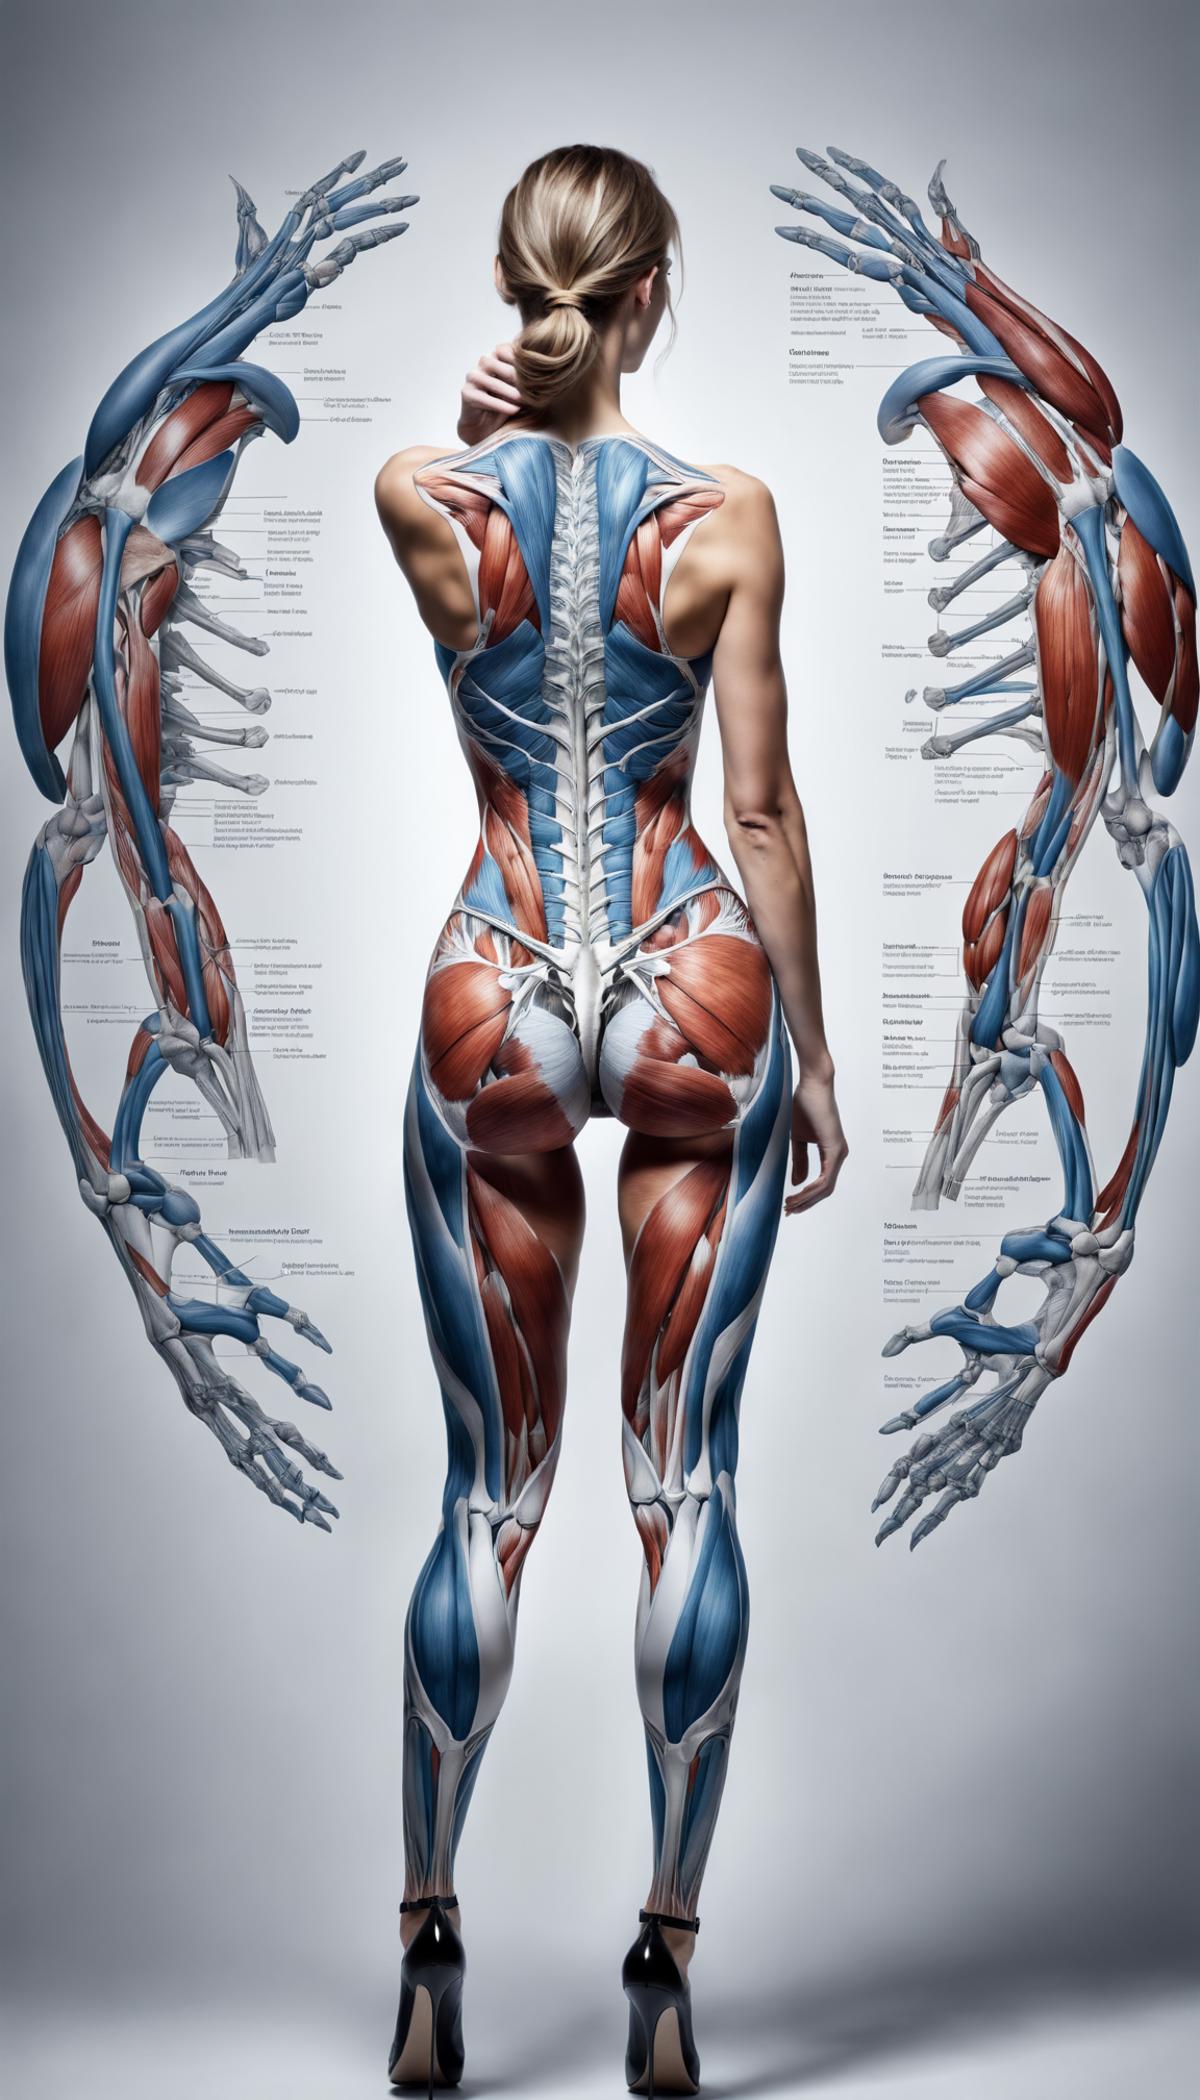 Anatomical Chart of Human Body with Diagrams and Muscles